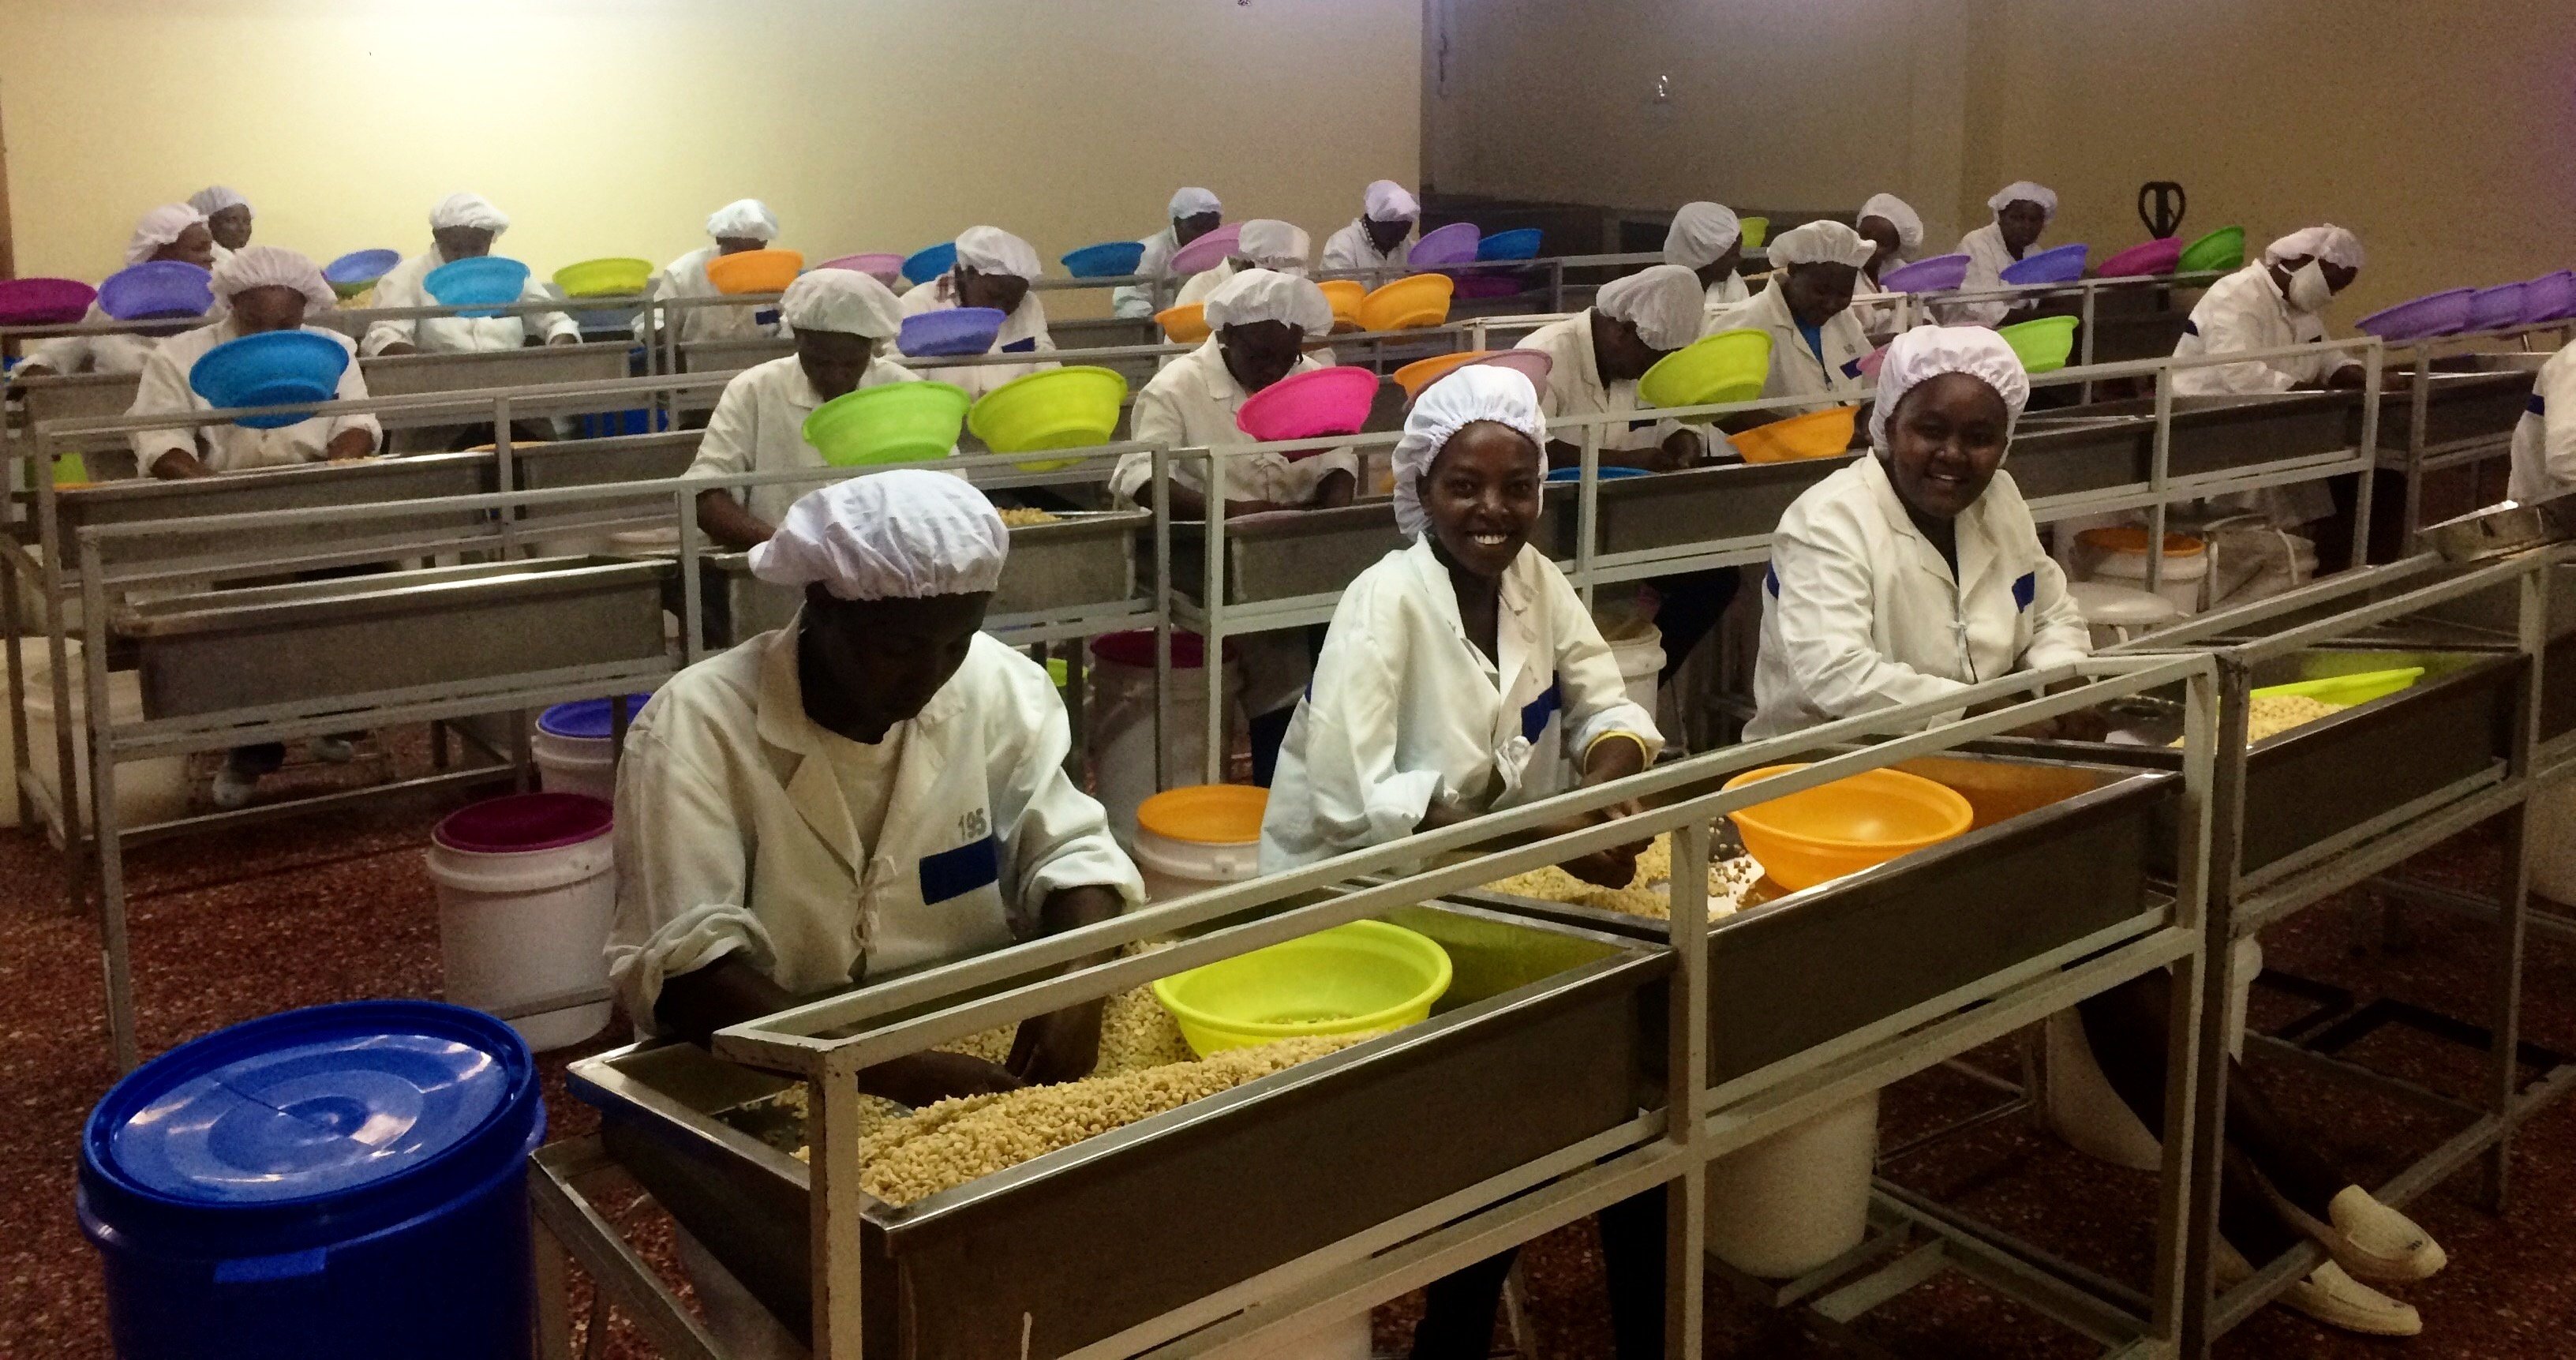 Employees of Sagana Nut sorting macadamia nuts at the business' factory.